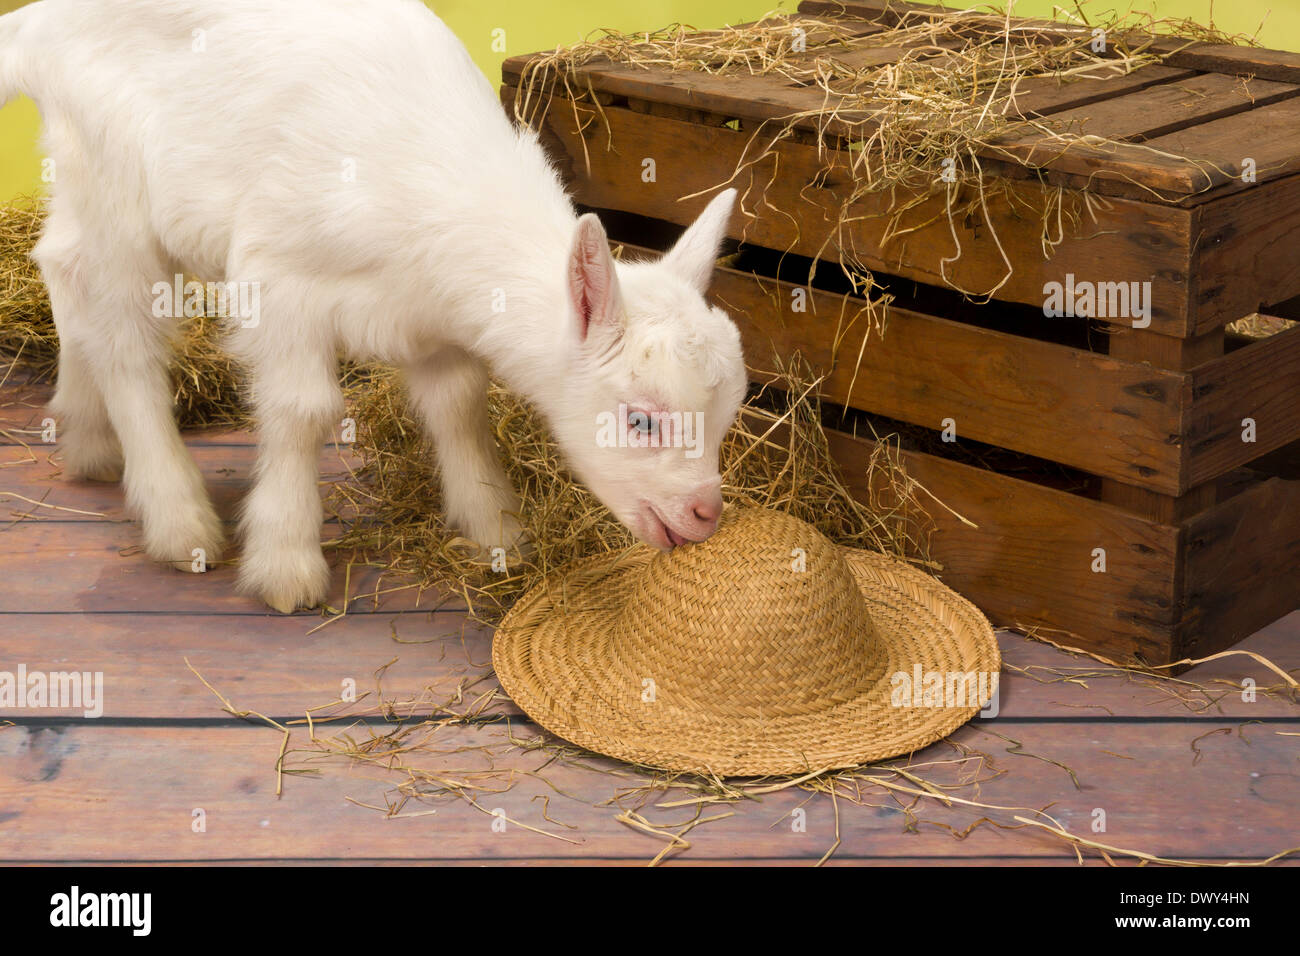 Naughty ten days old baby milk goat eating a straw hat Stock Photo